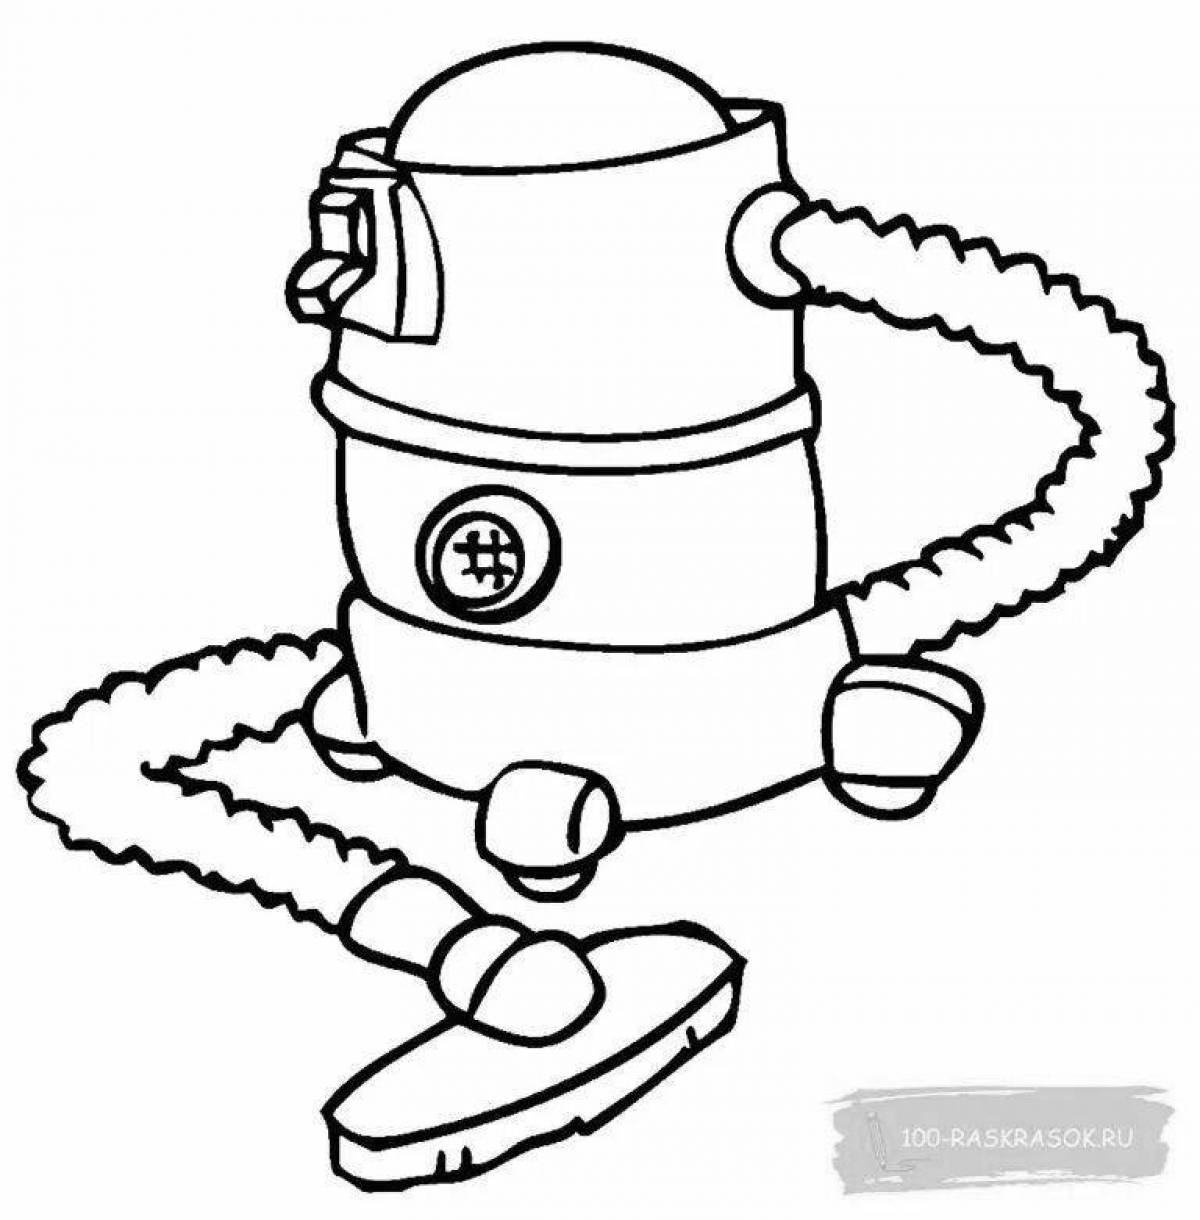 Fun coloring of the vacuum cleaner for kids